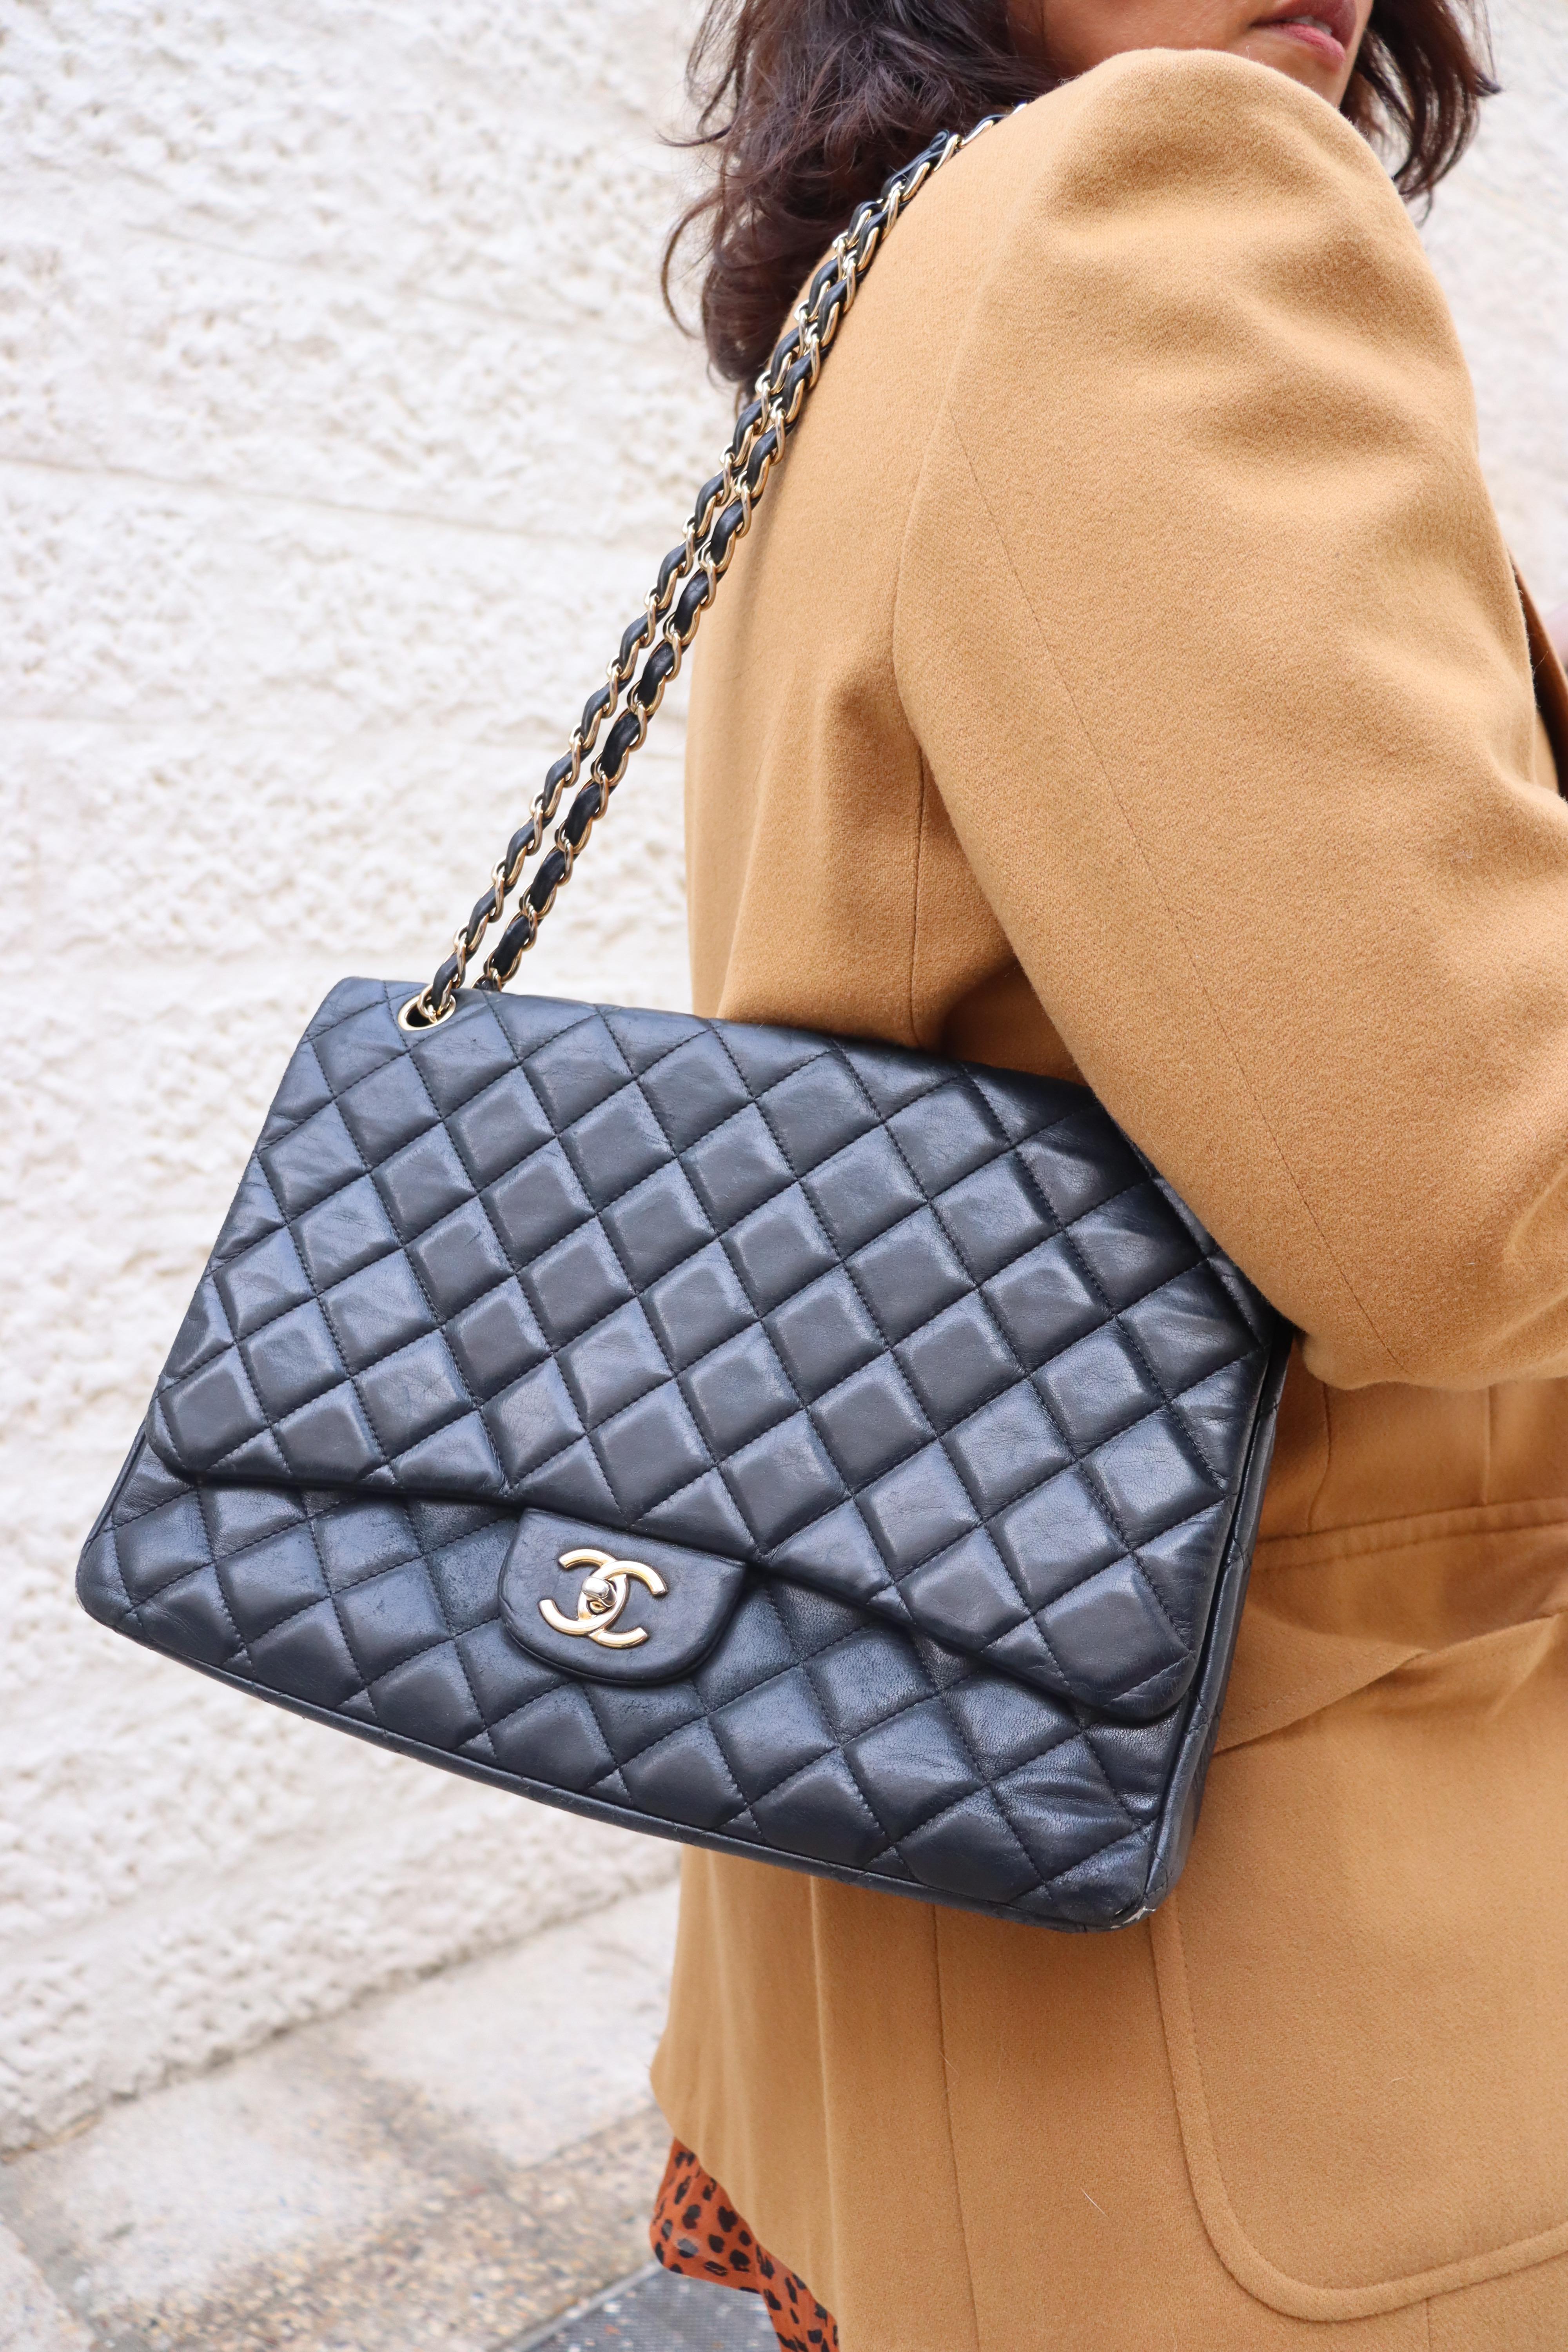 Chanel Maxi Classic Single Flap Bag For Sale 6